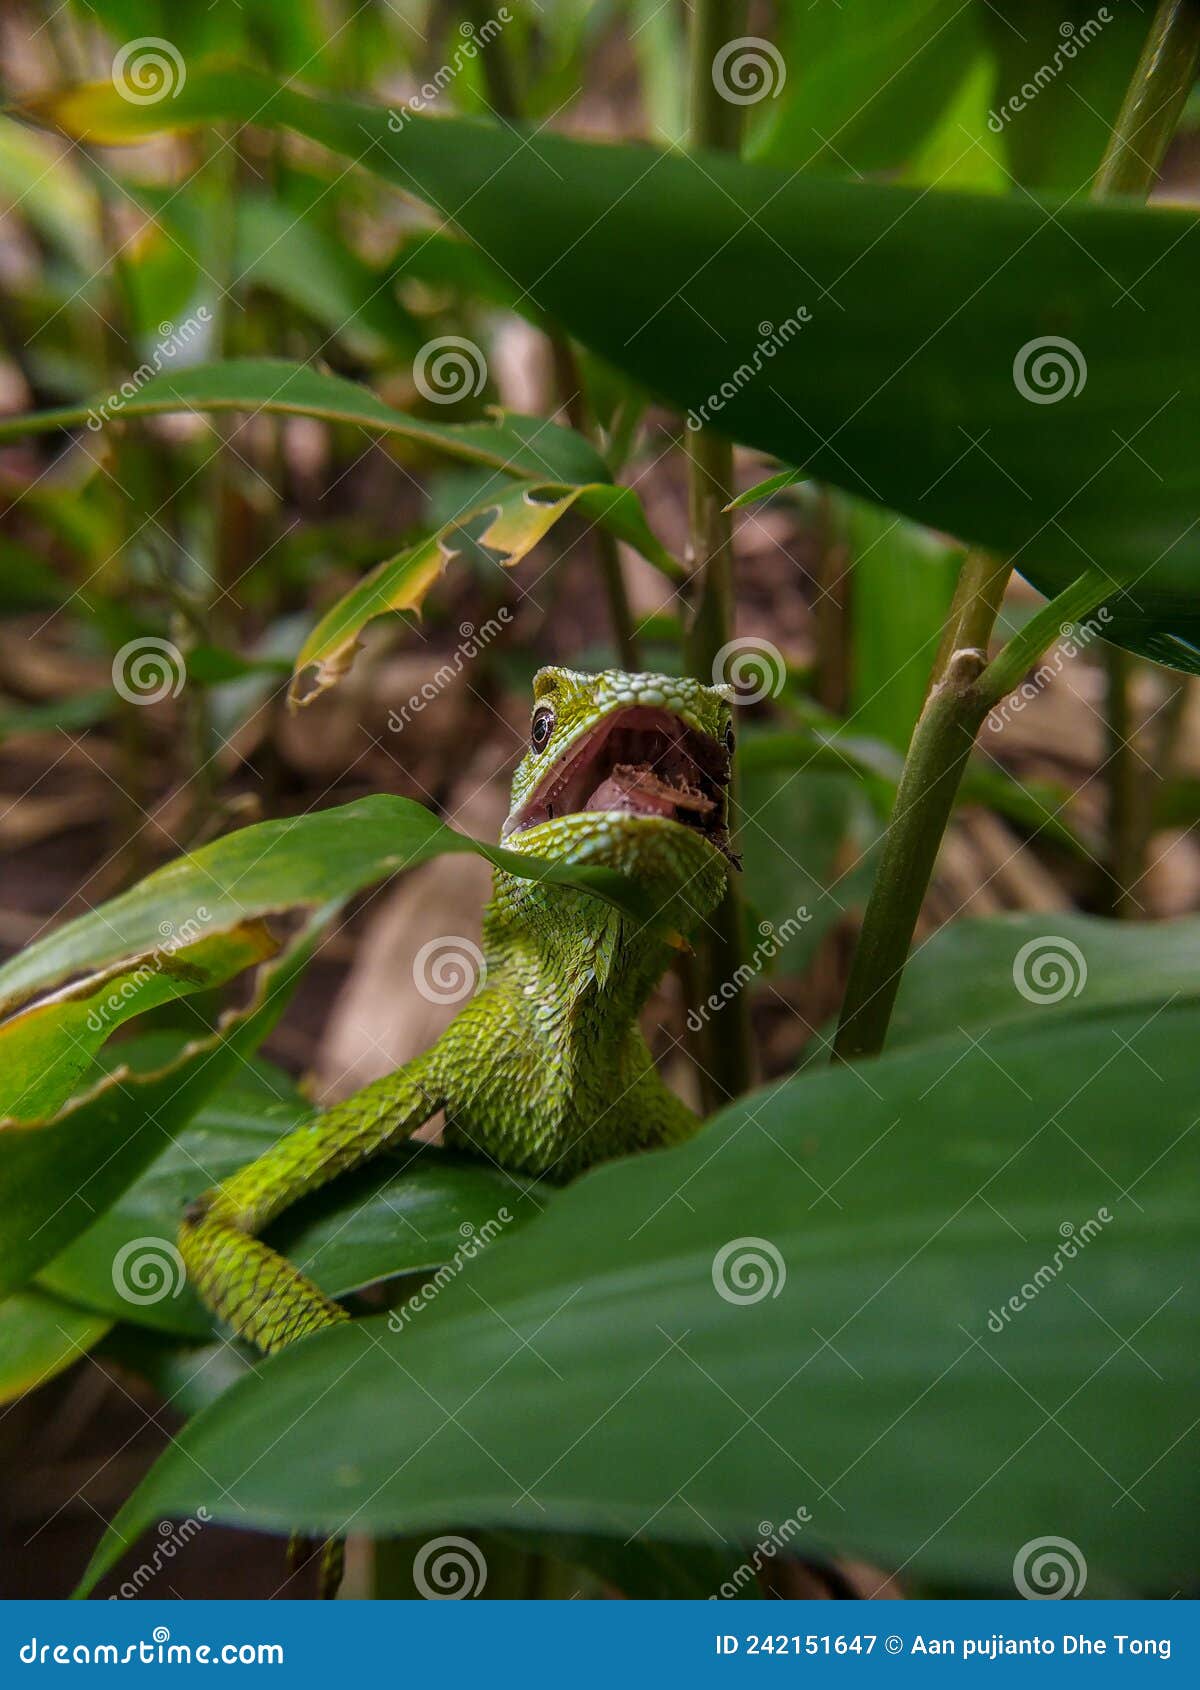 green chameleon on the tree. reptil. fauna, animals.